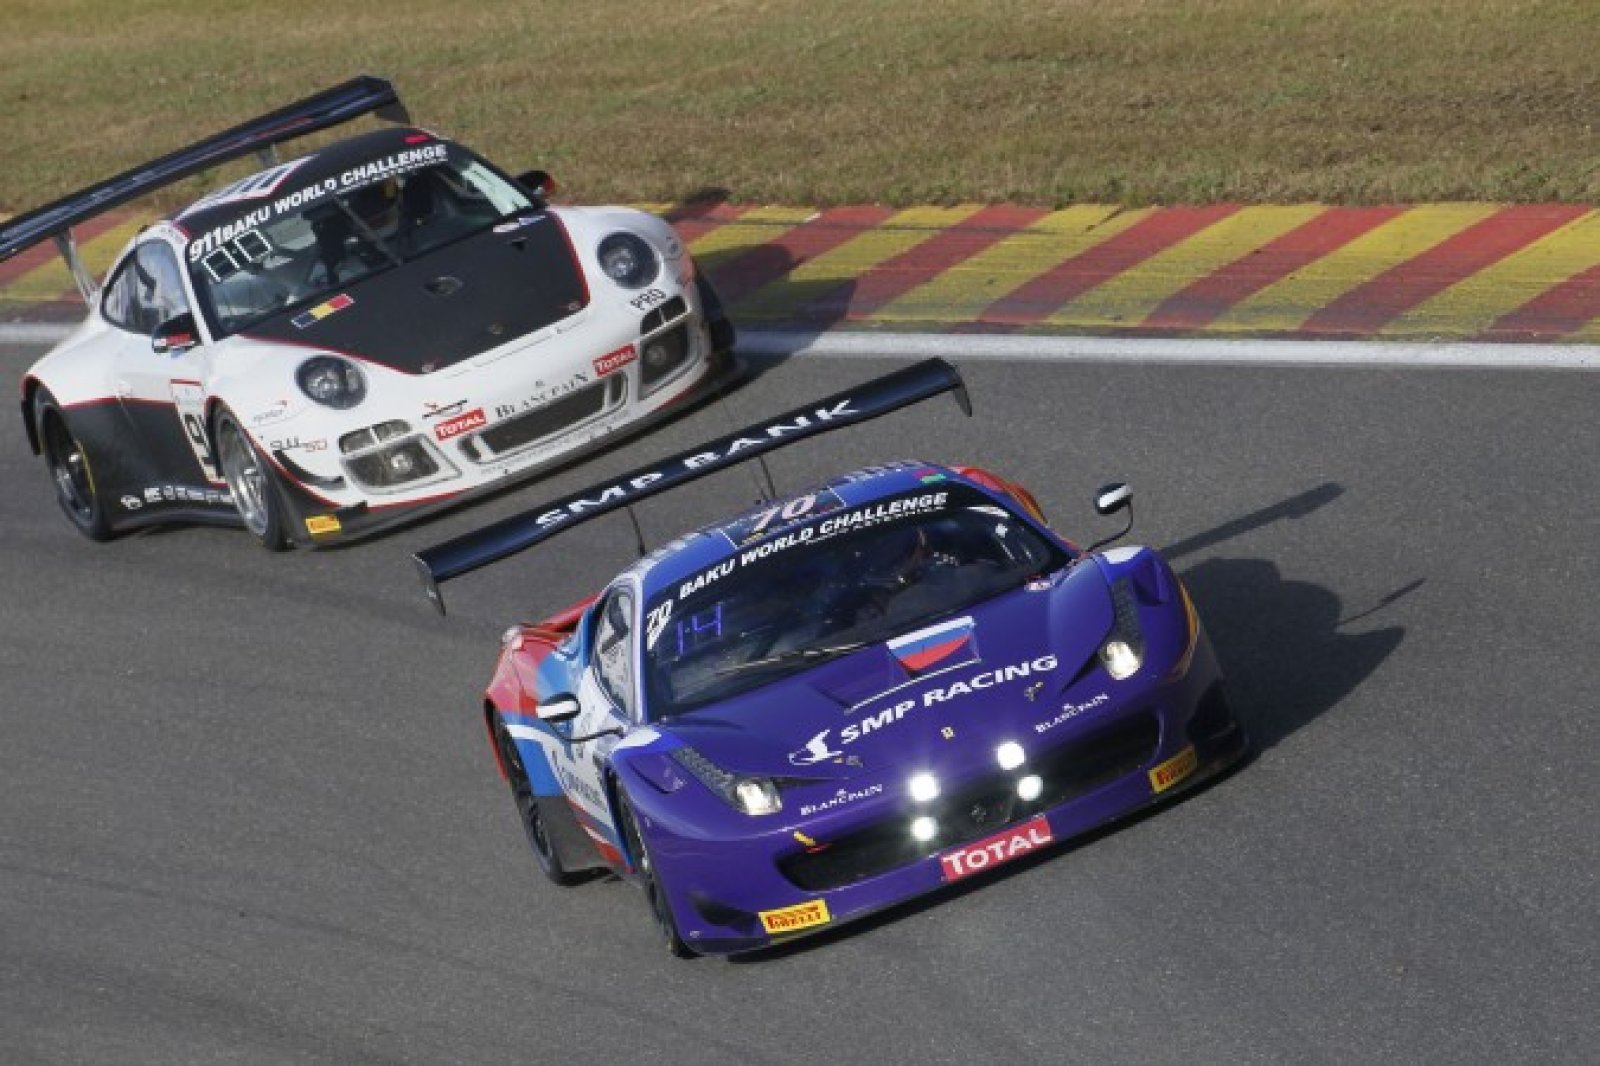 SMP Racing Ferrari takes provisional pole for 65th Total 24 Hours of Spa